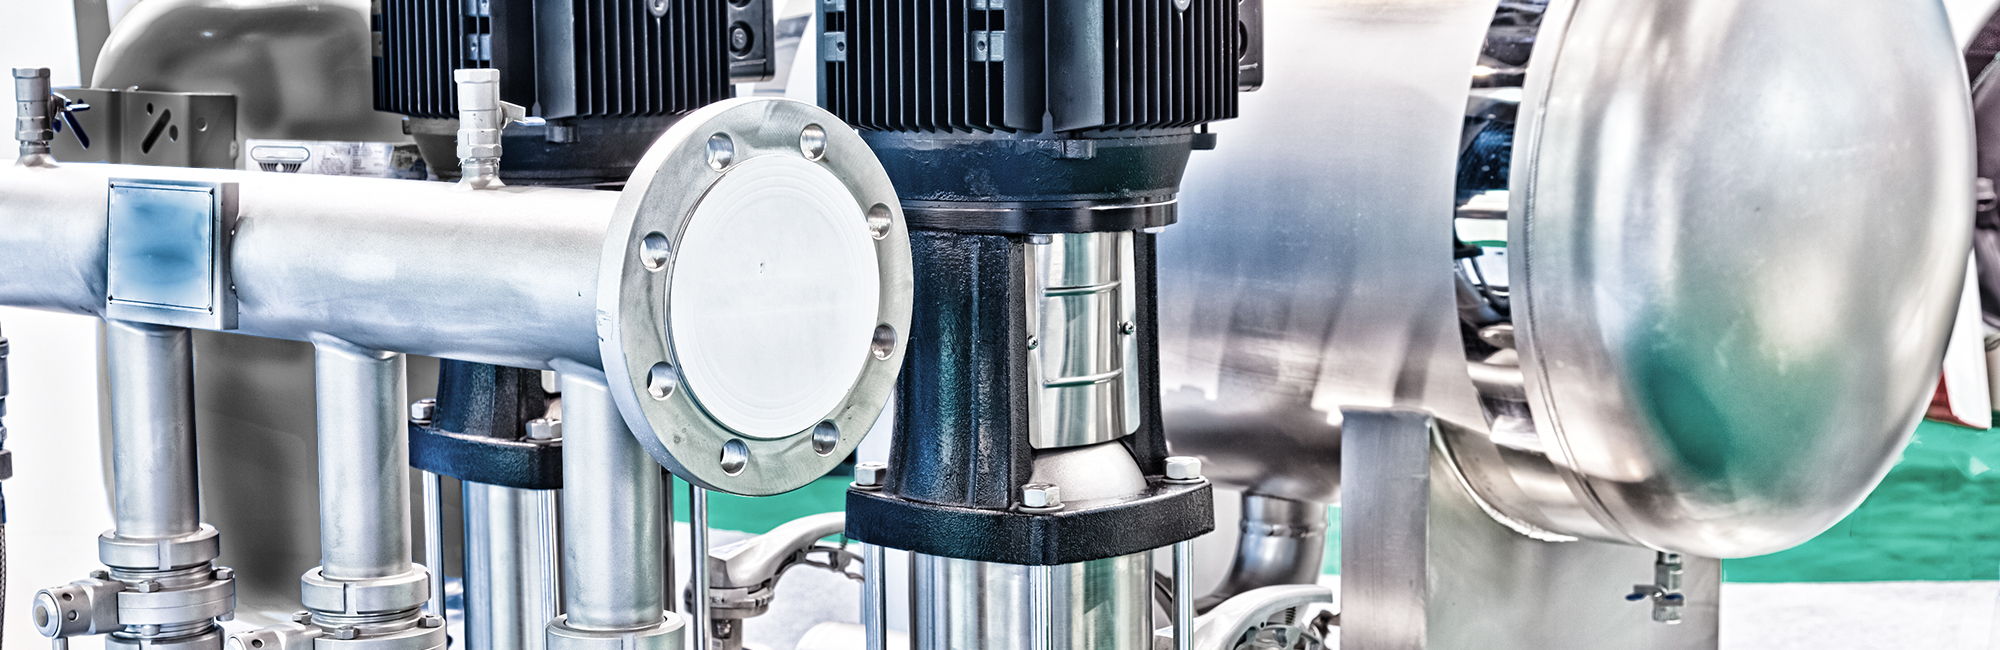 Pumping technology for the machine tool sector